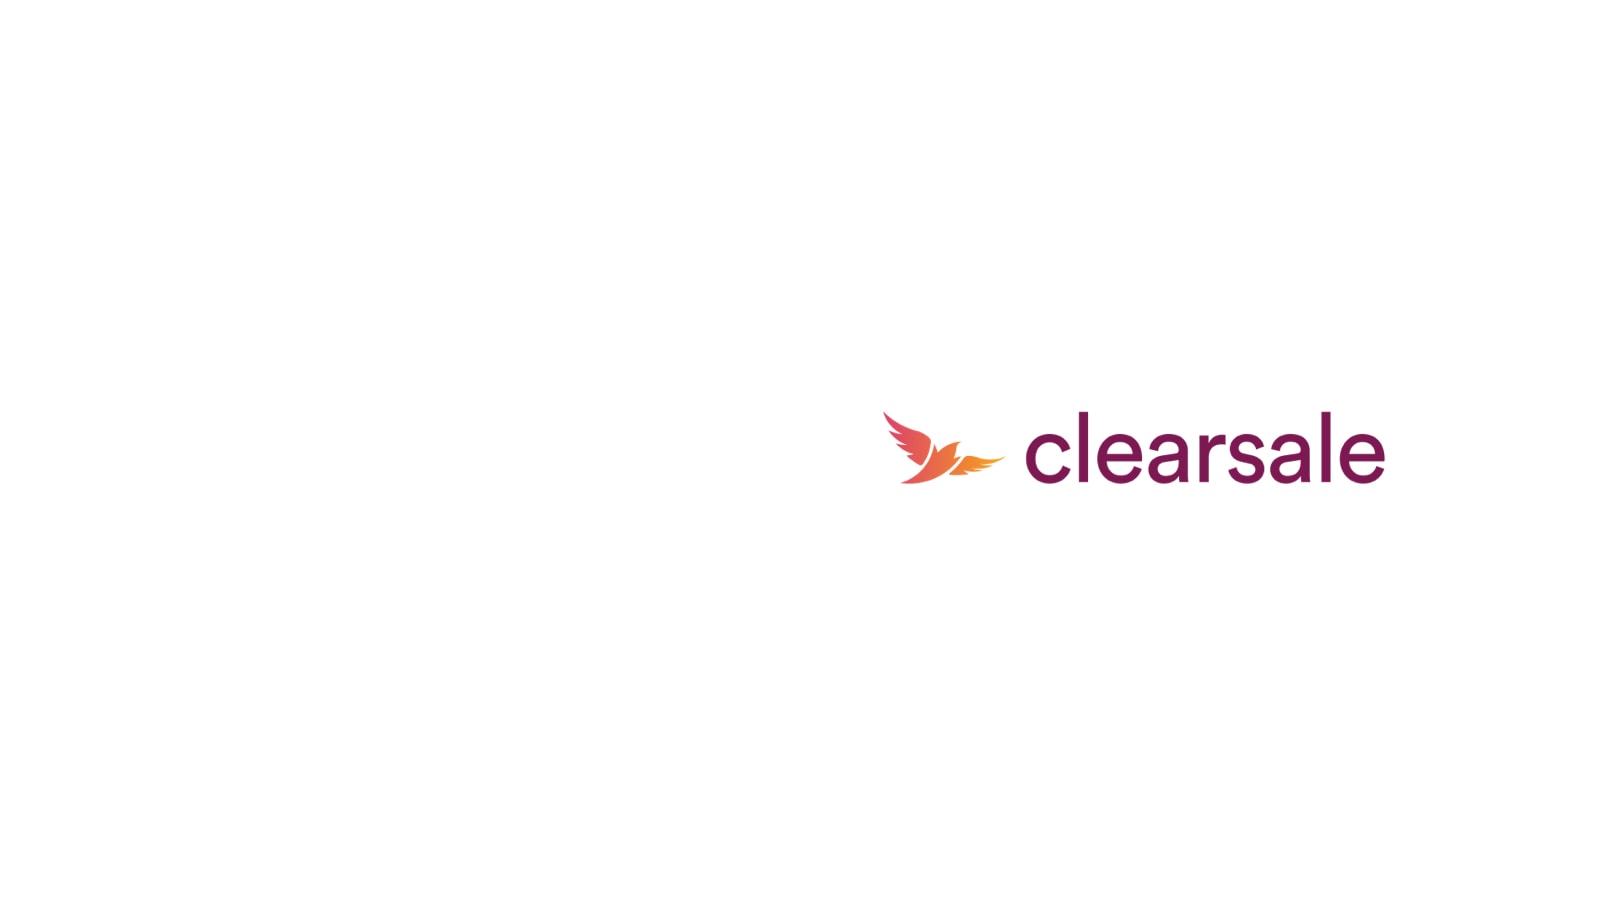 clearsale logo.